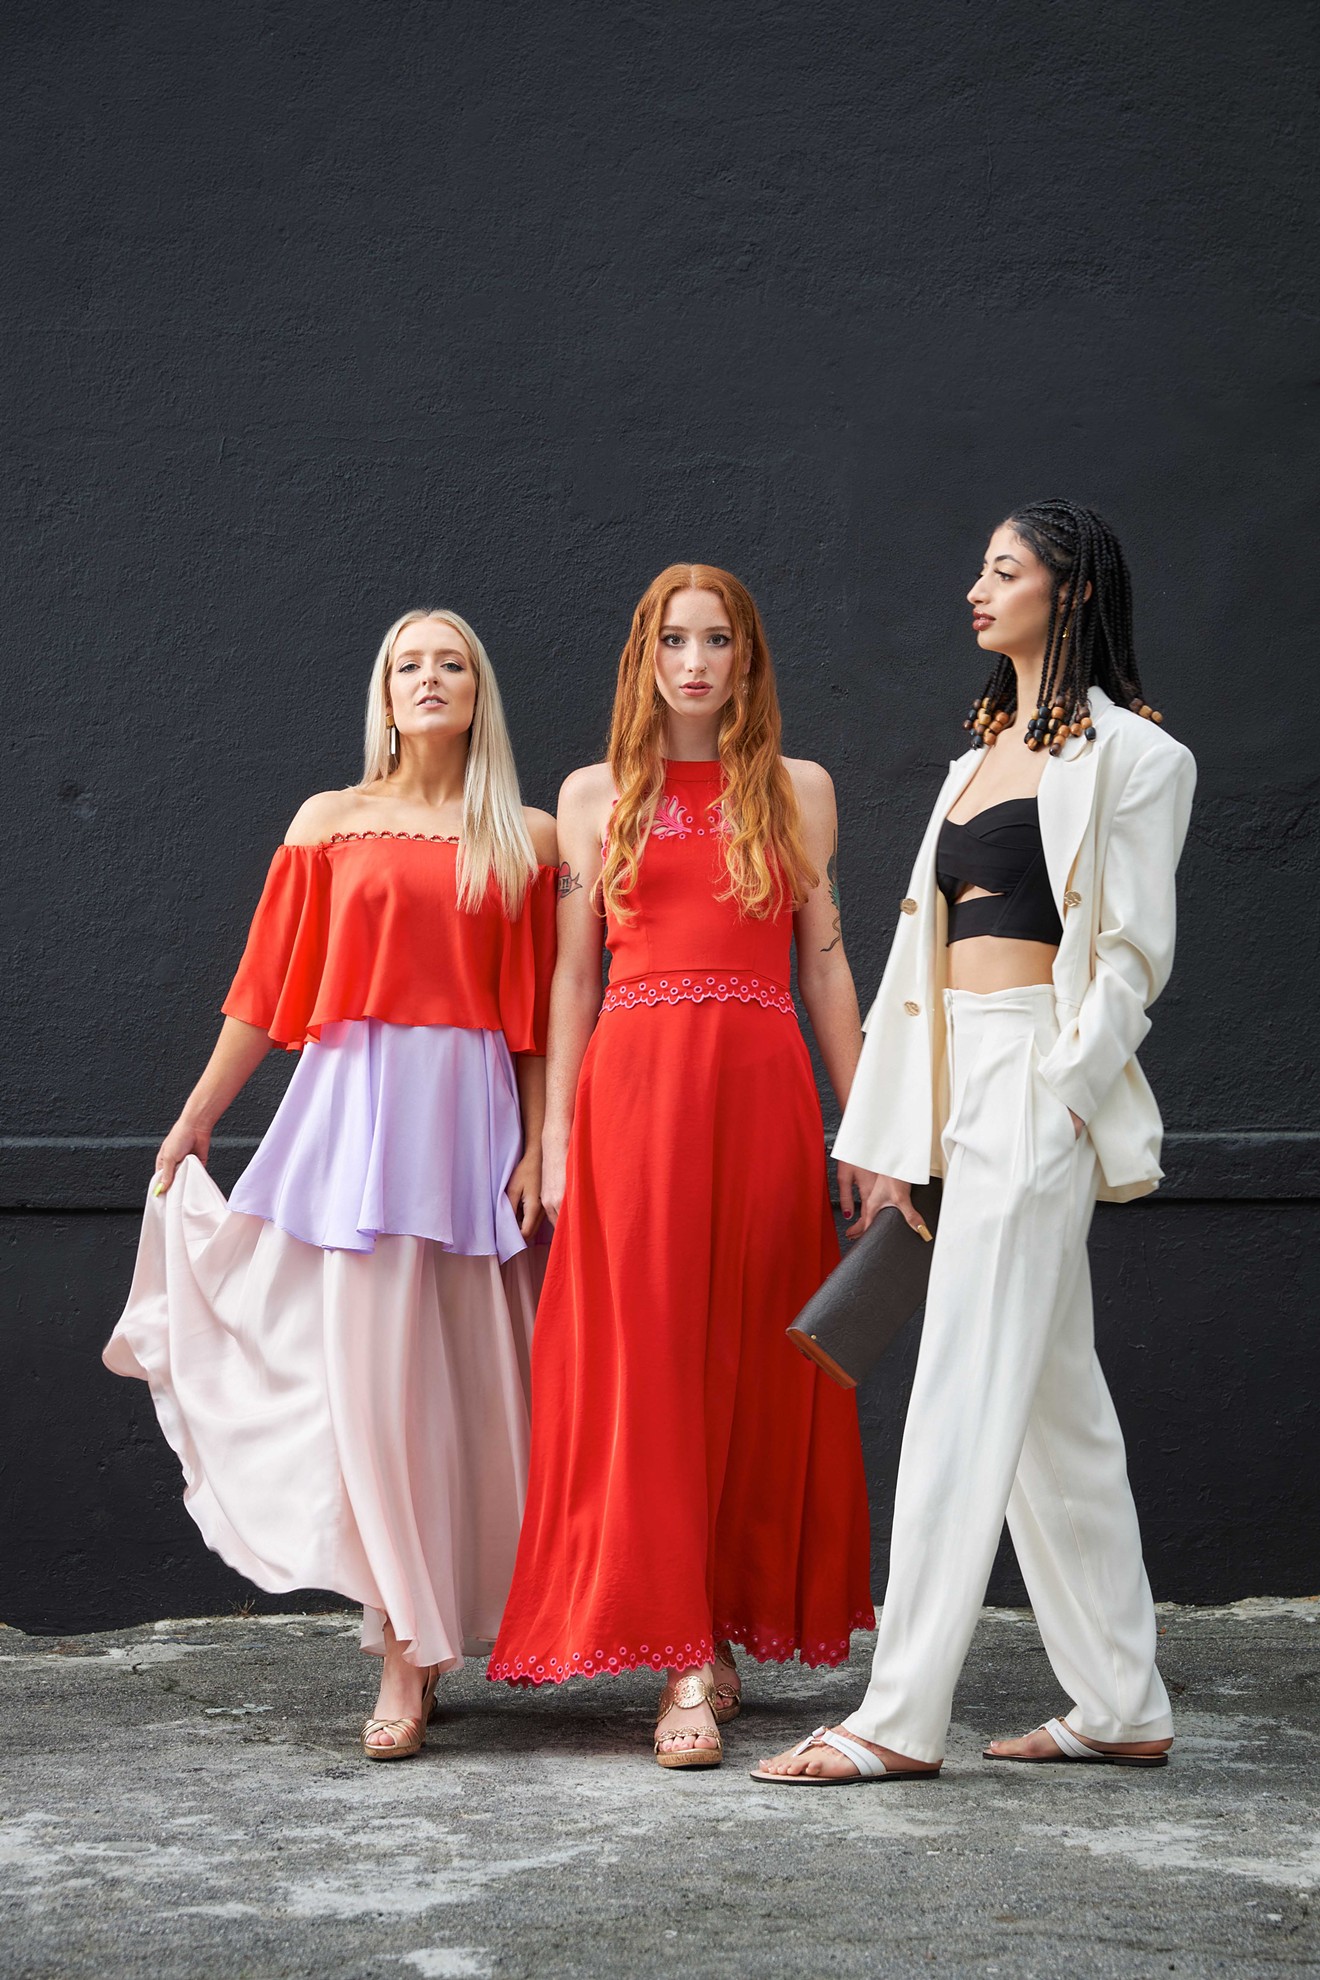 Lauren Wolverton, Caitlin Anthony and Lilli Belue model the latest Savannah summer fashion trends.